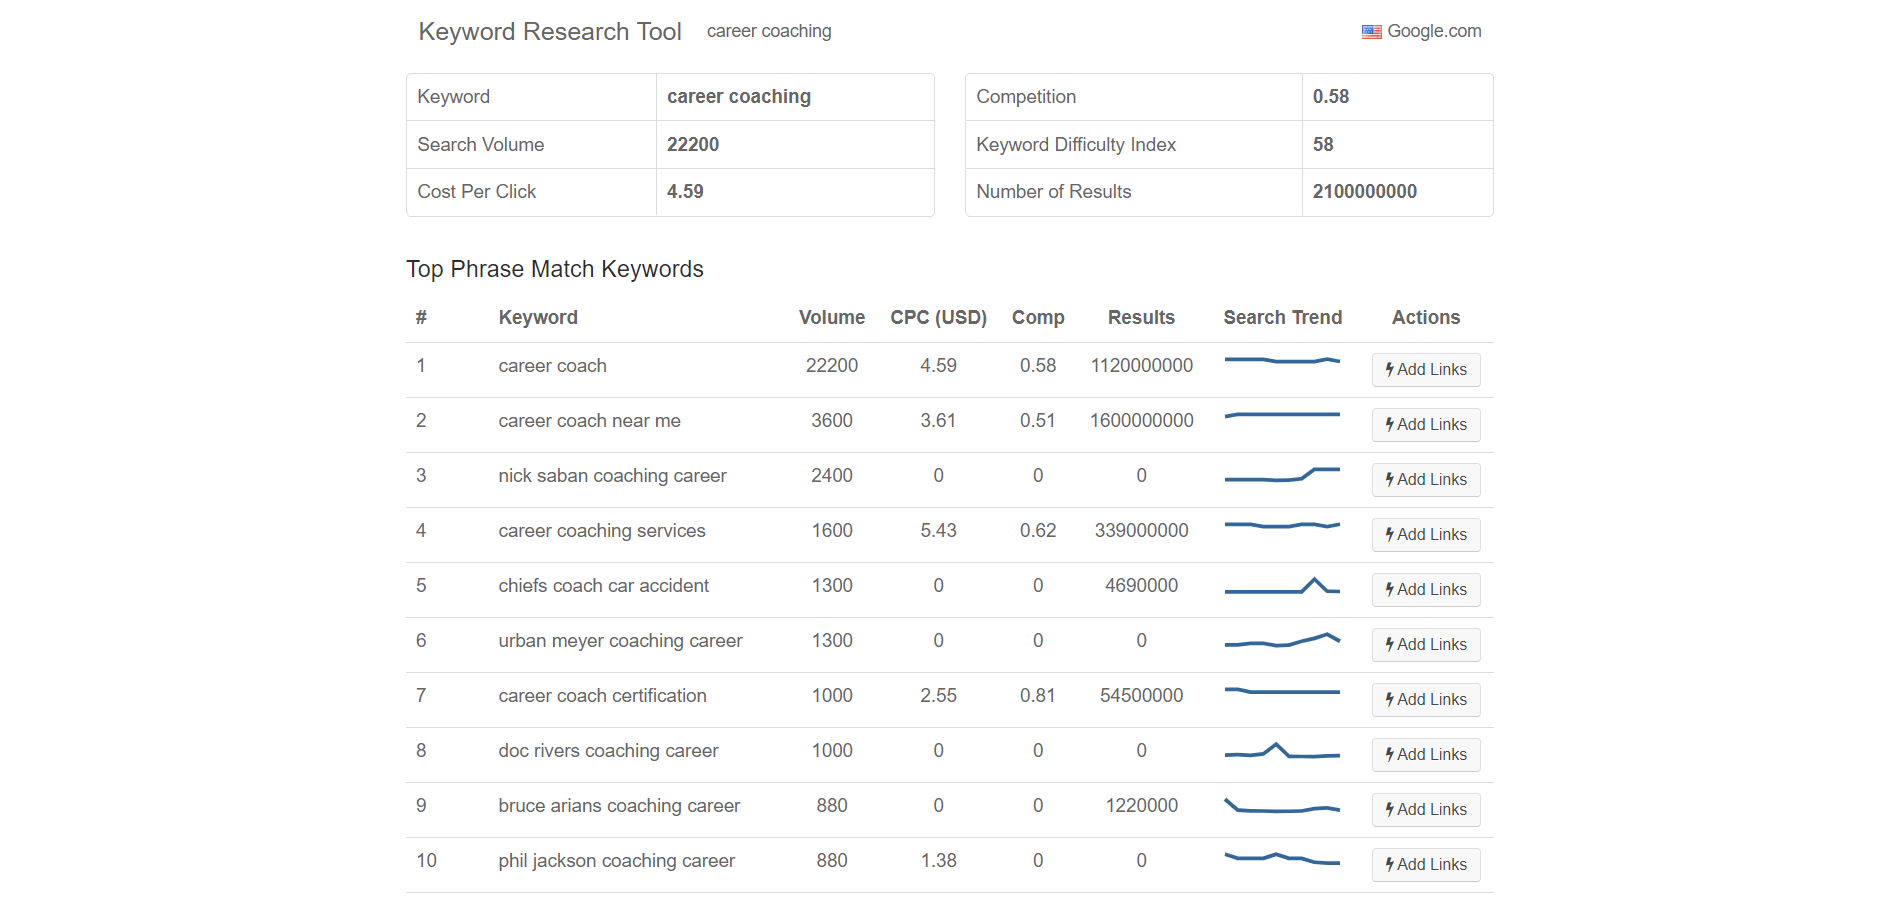 Keyword research tool results